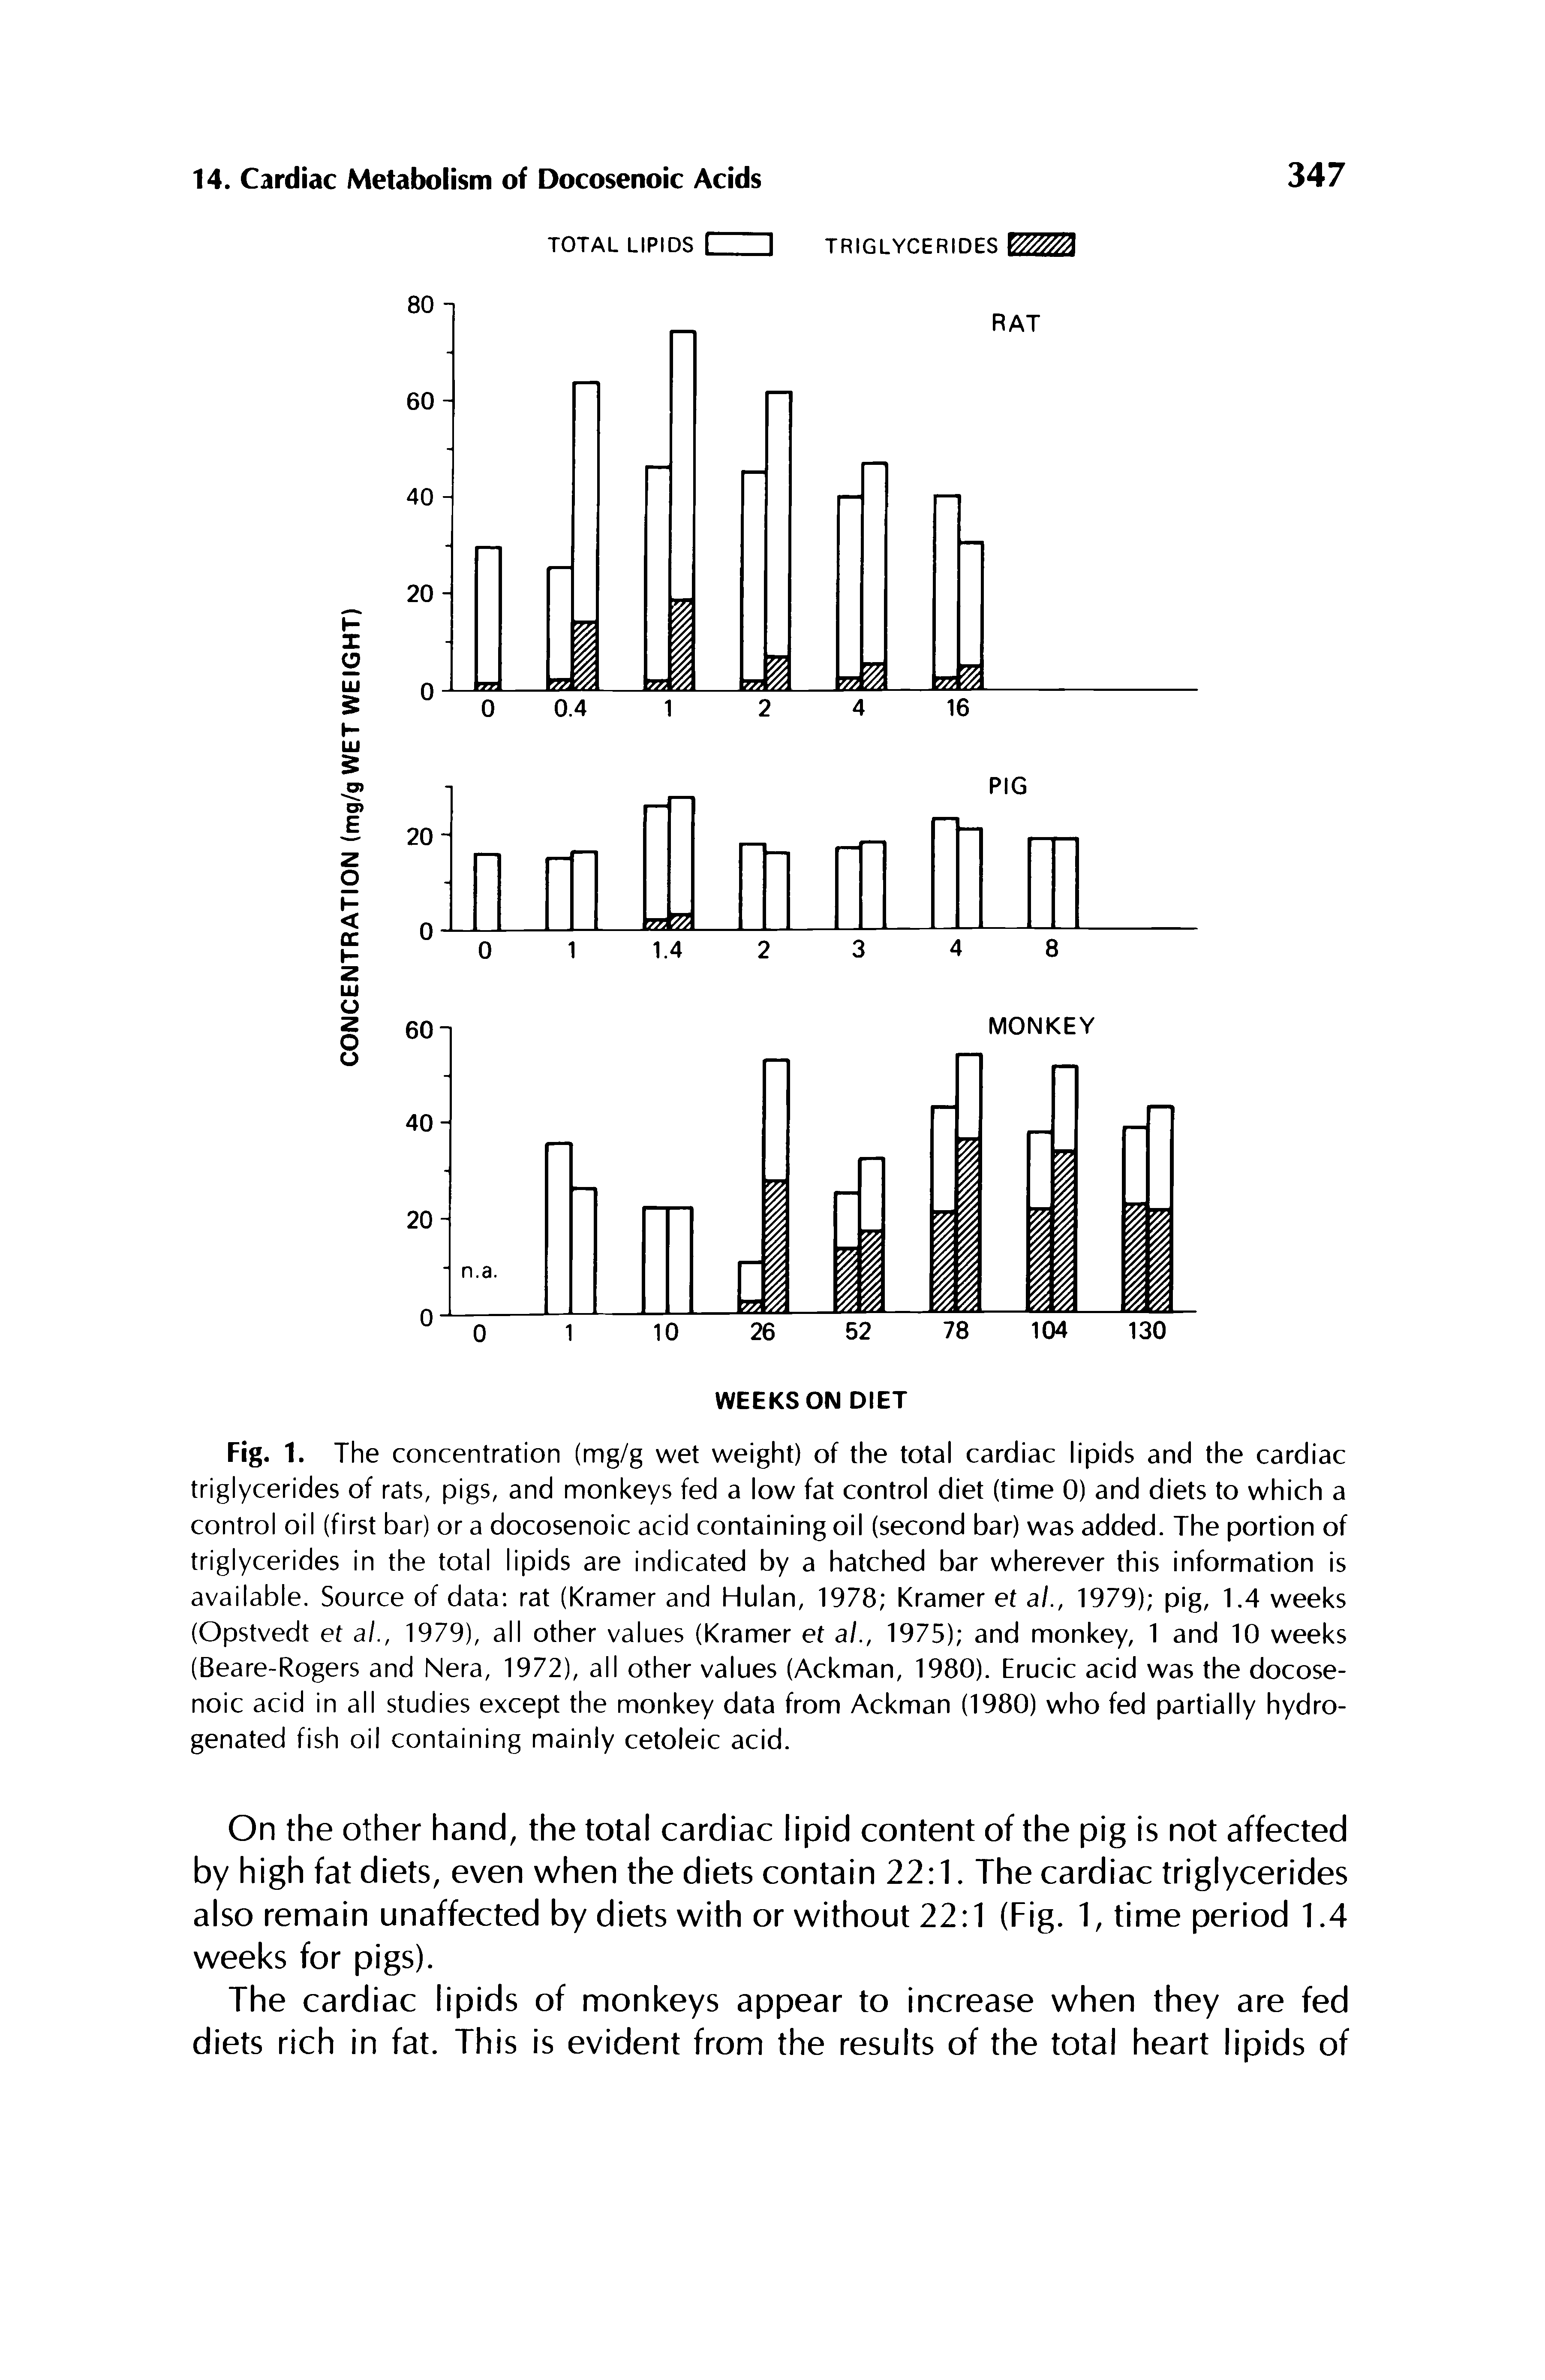 Fig. 1. The concentration (mg/g wet weight) of the total cardiac lipids and the cardiac triglycerides of rats, pigs, and monkeys fed a low fat control diet (time 0) and diets to which a control oil (first bar) or a docosenoic acid containing oil (second bar) was added. The portion of triglycerides in the total lipids are indicated by a hatched bar wherever this information is available. Source of data rat (Kramer and Hulan, 1978 Kramer et al., 1979) pig, 1.4 weeks (Opstvedt et al., 1979), all other values (Kramer et a/., 1975) and monkey, 1 and 10 weeks (Beare-Rogers and Nera, 1972), all other values (Ackman, 1980). Erucic acid was the docosenoic acid in all studies except the monkey data from Ackman (1980) who fed partially hydrogenated fish oil containing mainly cetoleic acid.